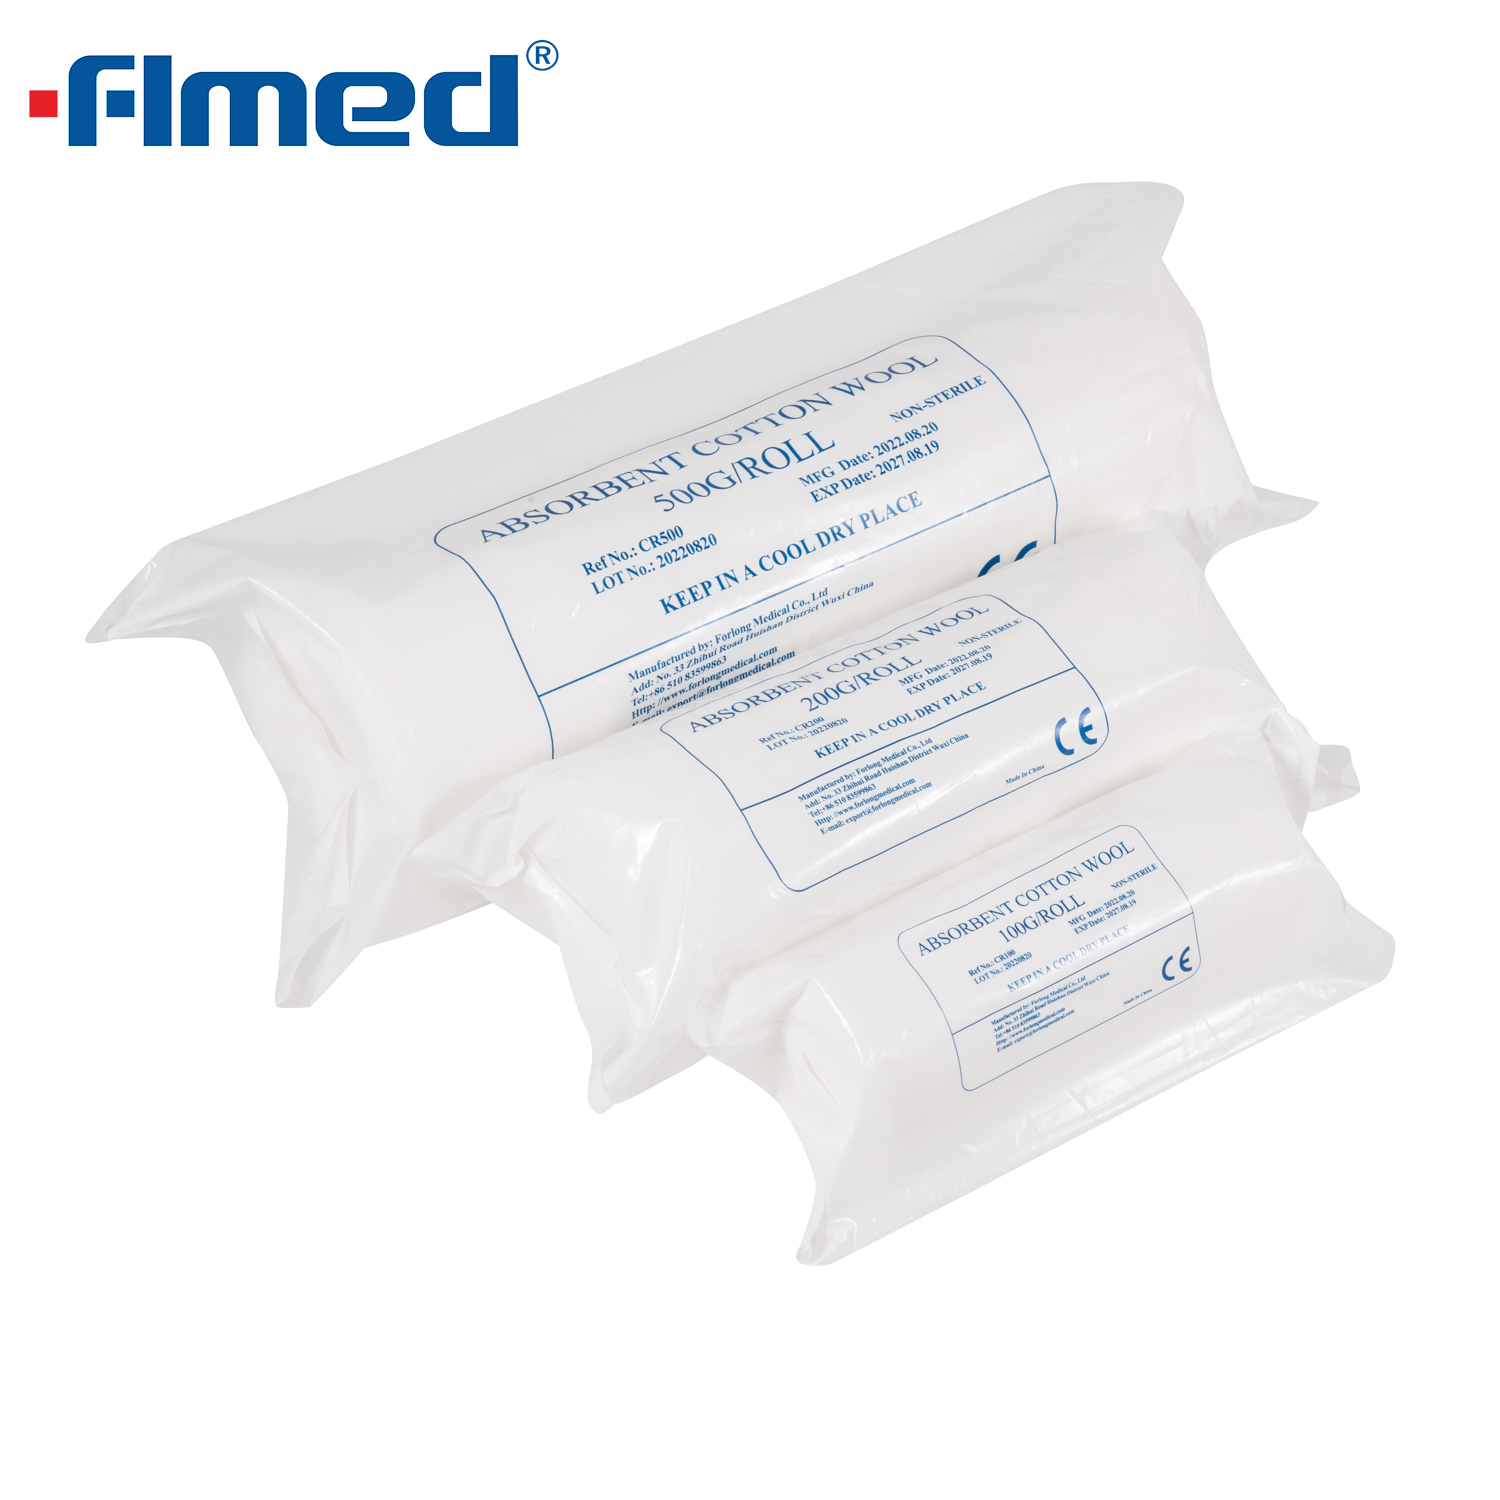 Cotton Wool Roll 500g for Medical Use